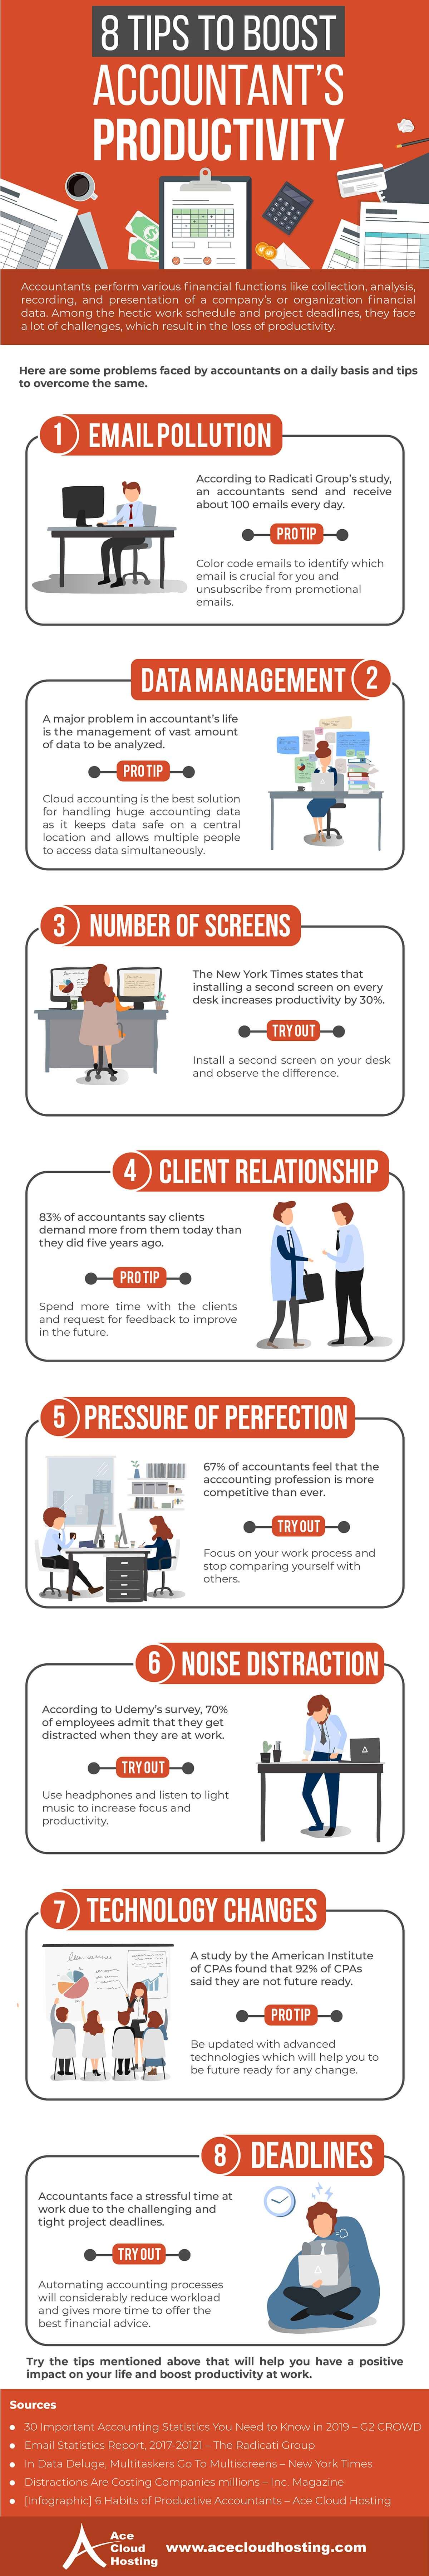 infographic-boost-accountant-productivity